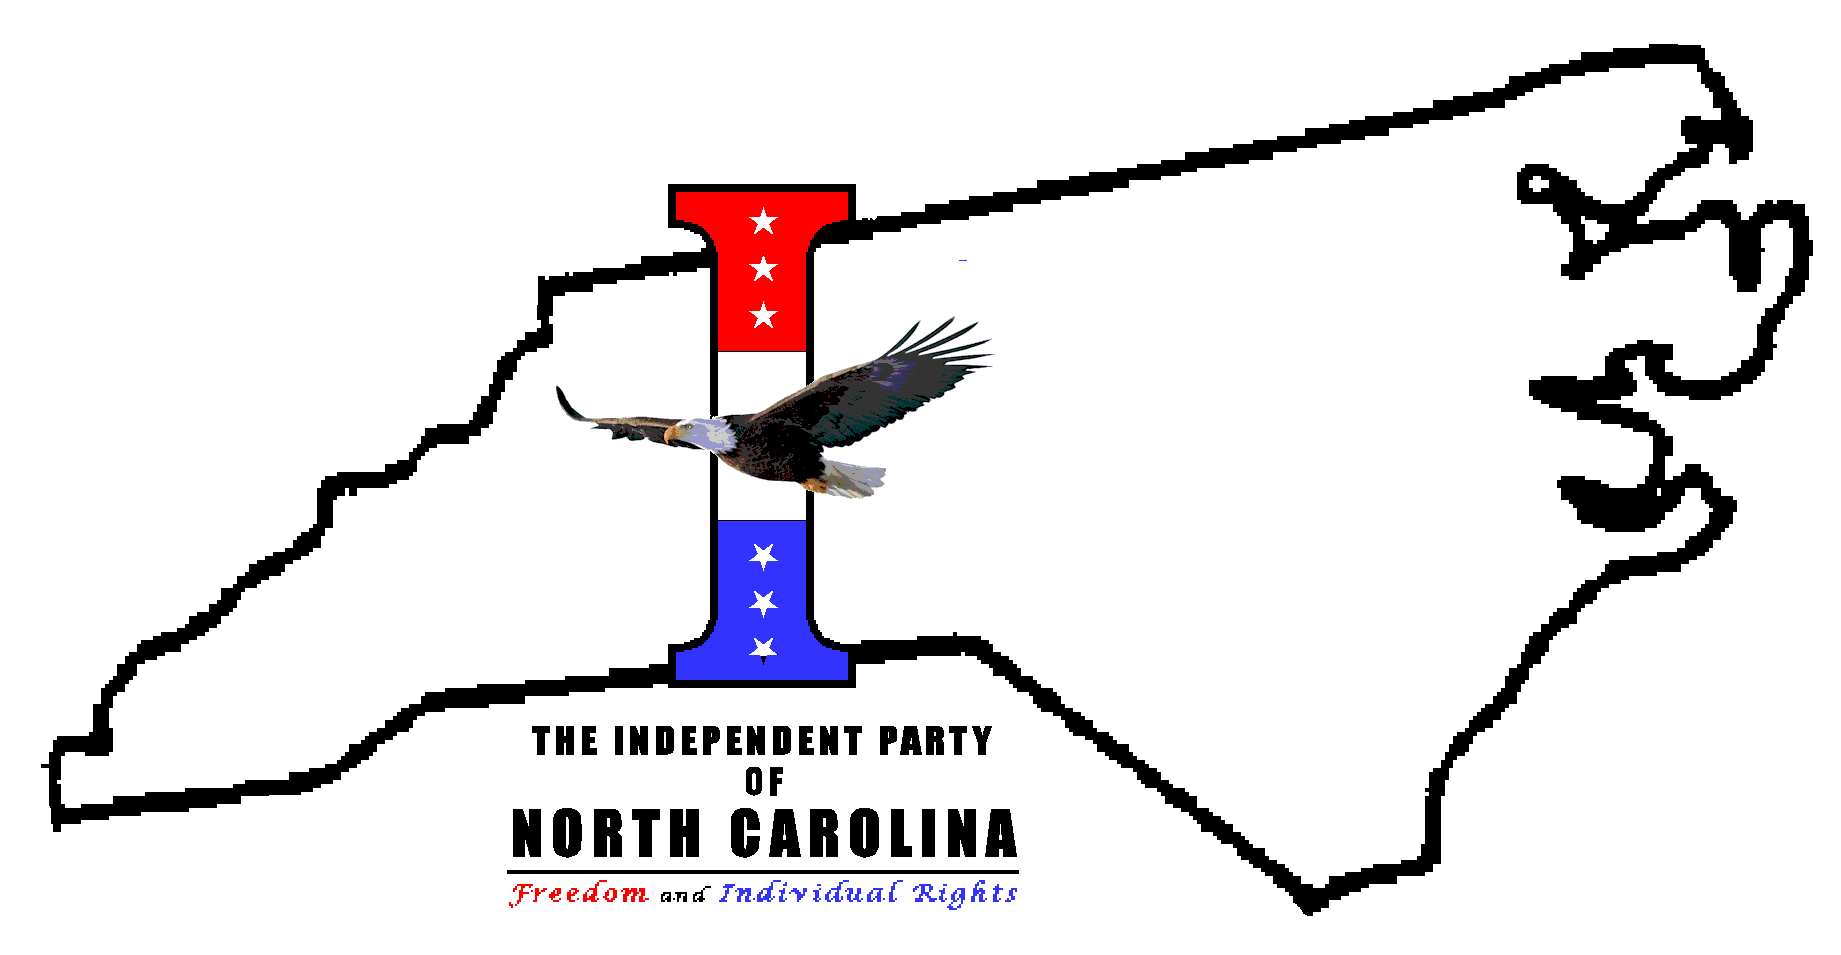 The Independent Party of North Carolina!